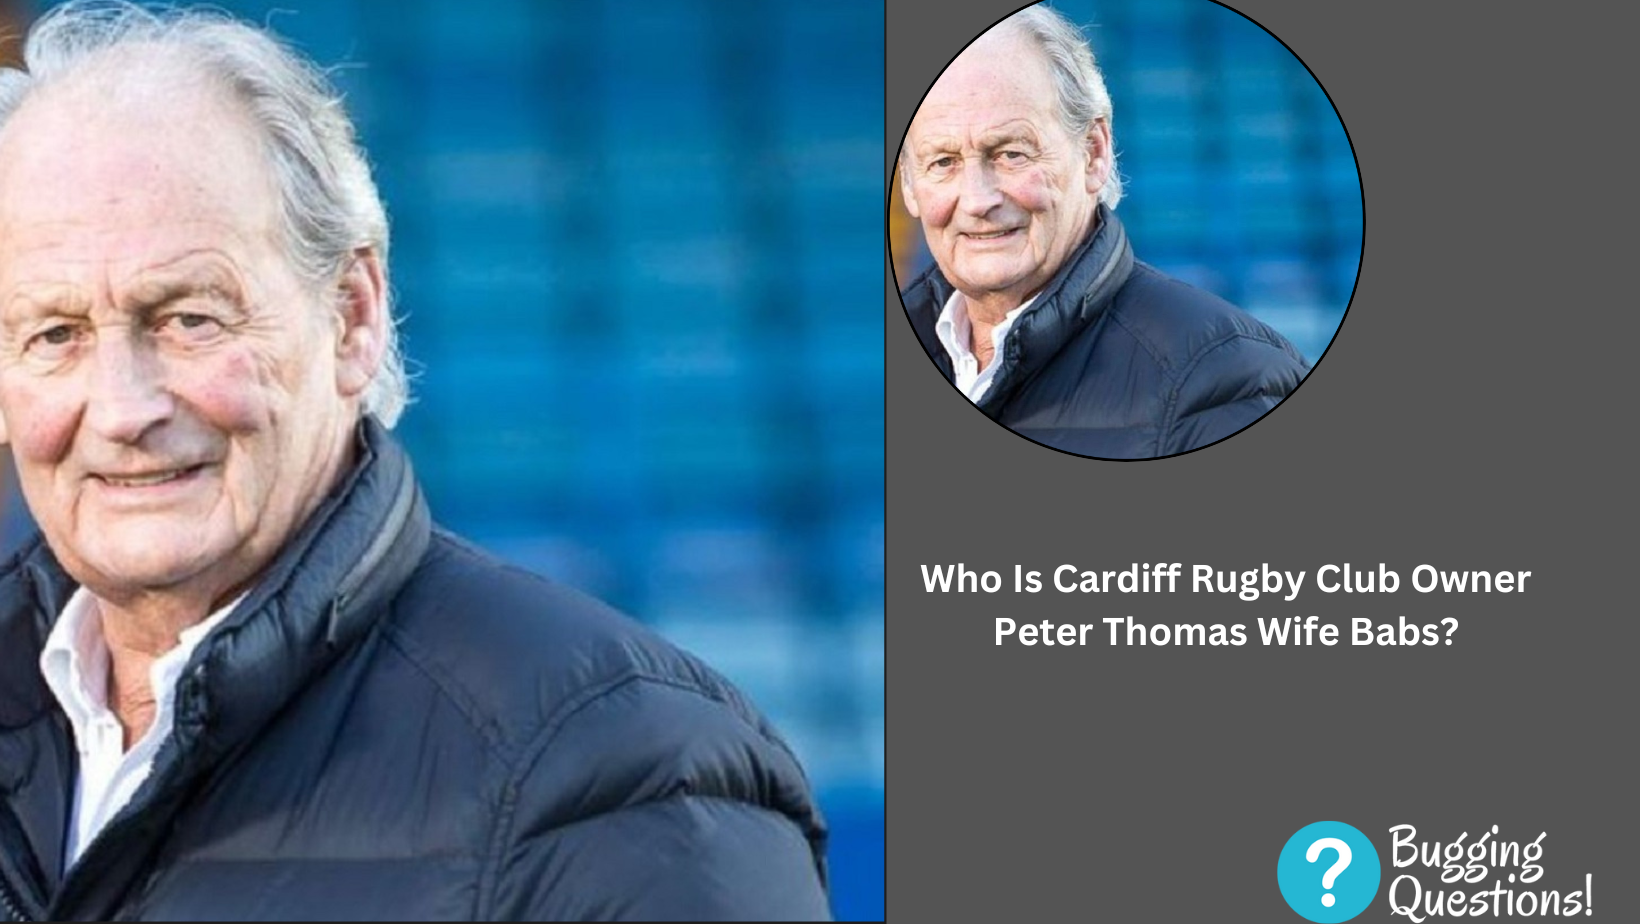 Who Is Cardiff Rugby Club Owner Peter Thomas Wife Babs?